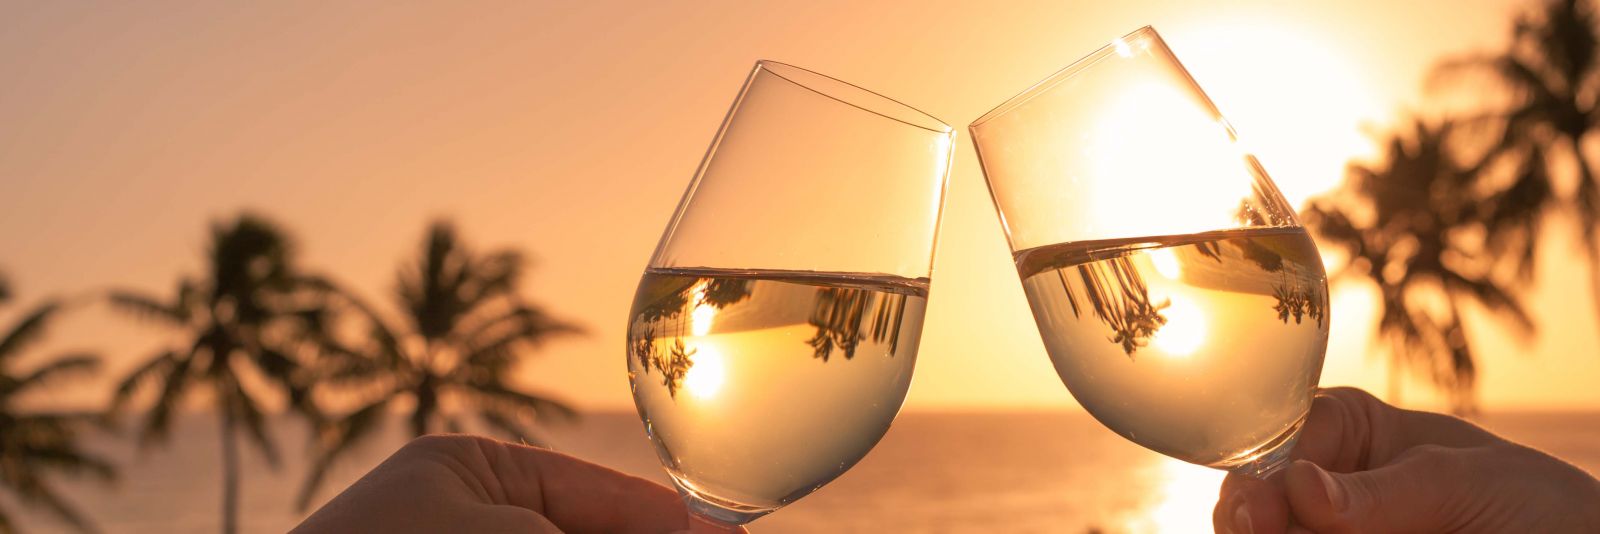 Drinking wine by sunset on the beach